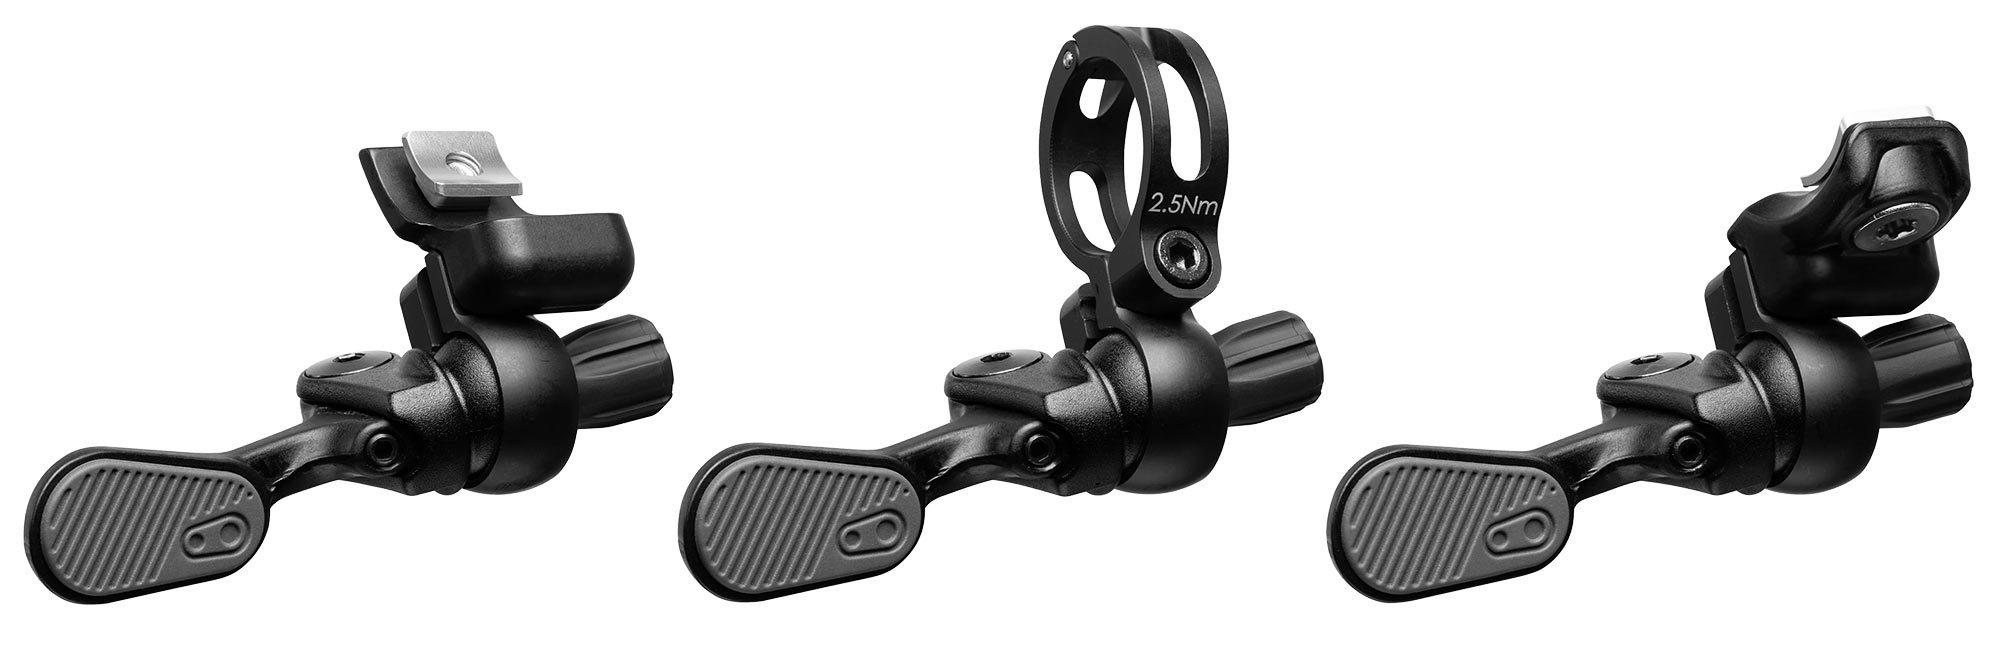 crank brothers highline dropper post remote with 360 degree swivel mount and infinite angle adjust